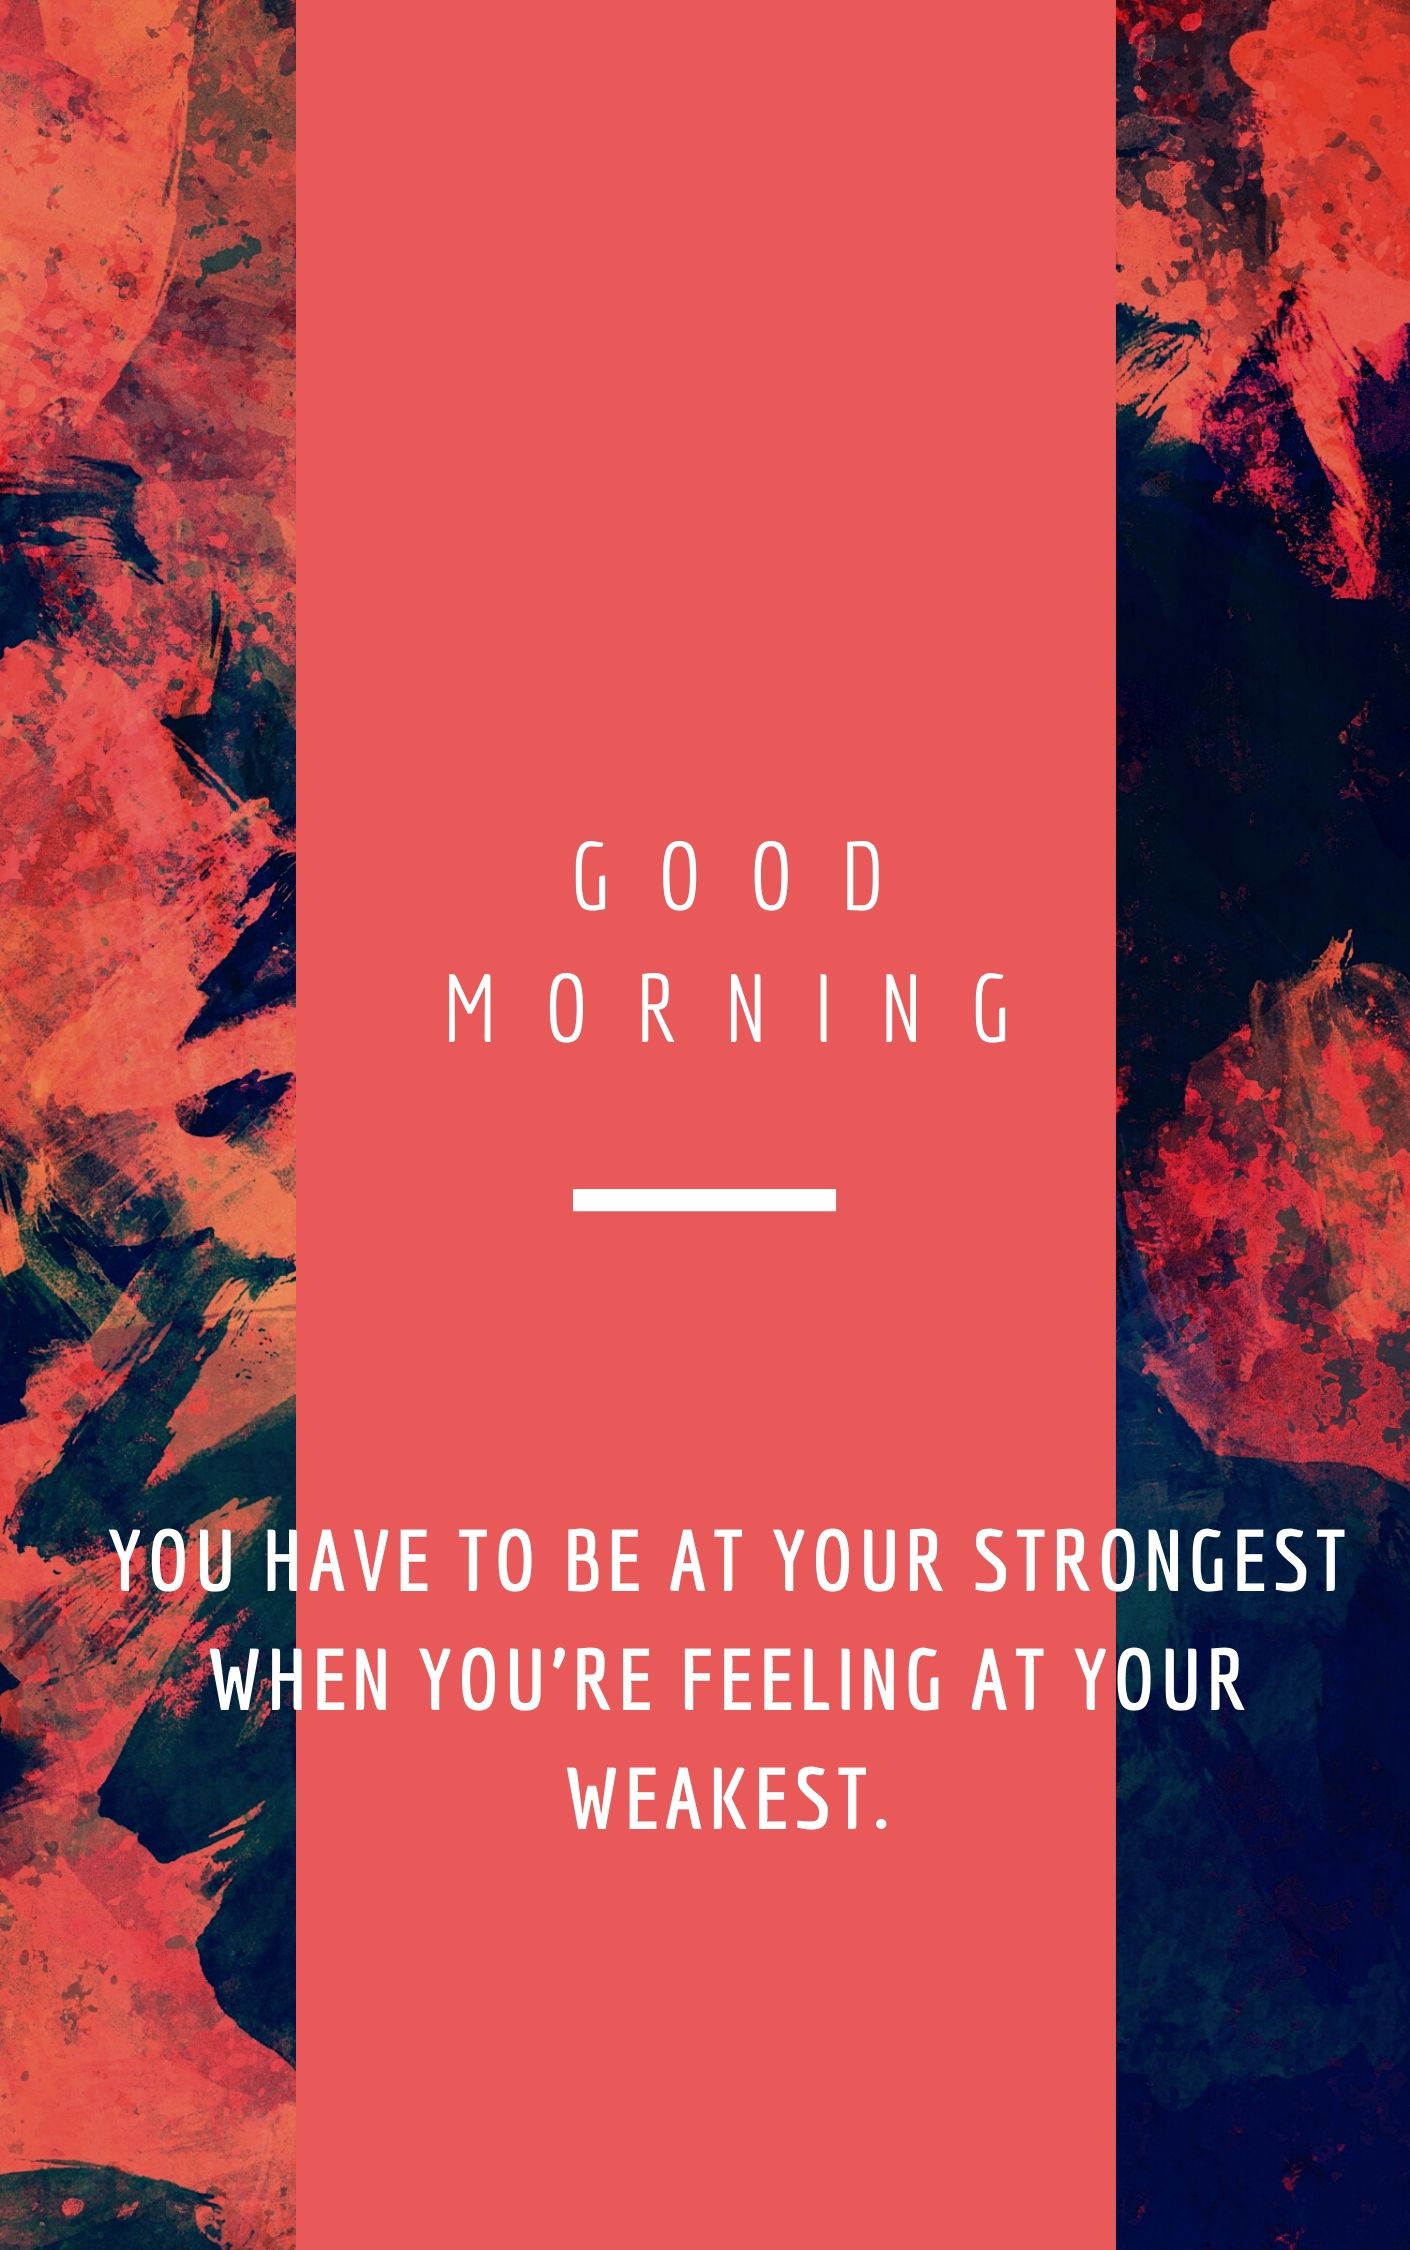 Be strongest when you at your weakest. Good Morning image with quotes full HD free download.